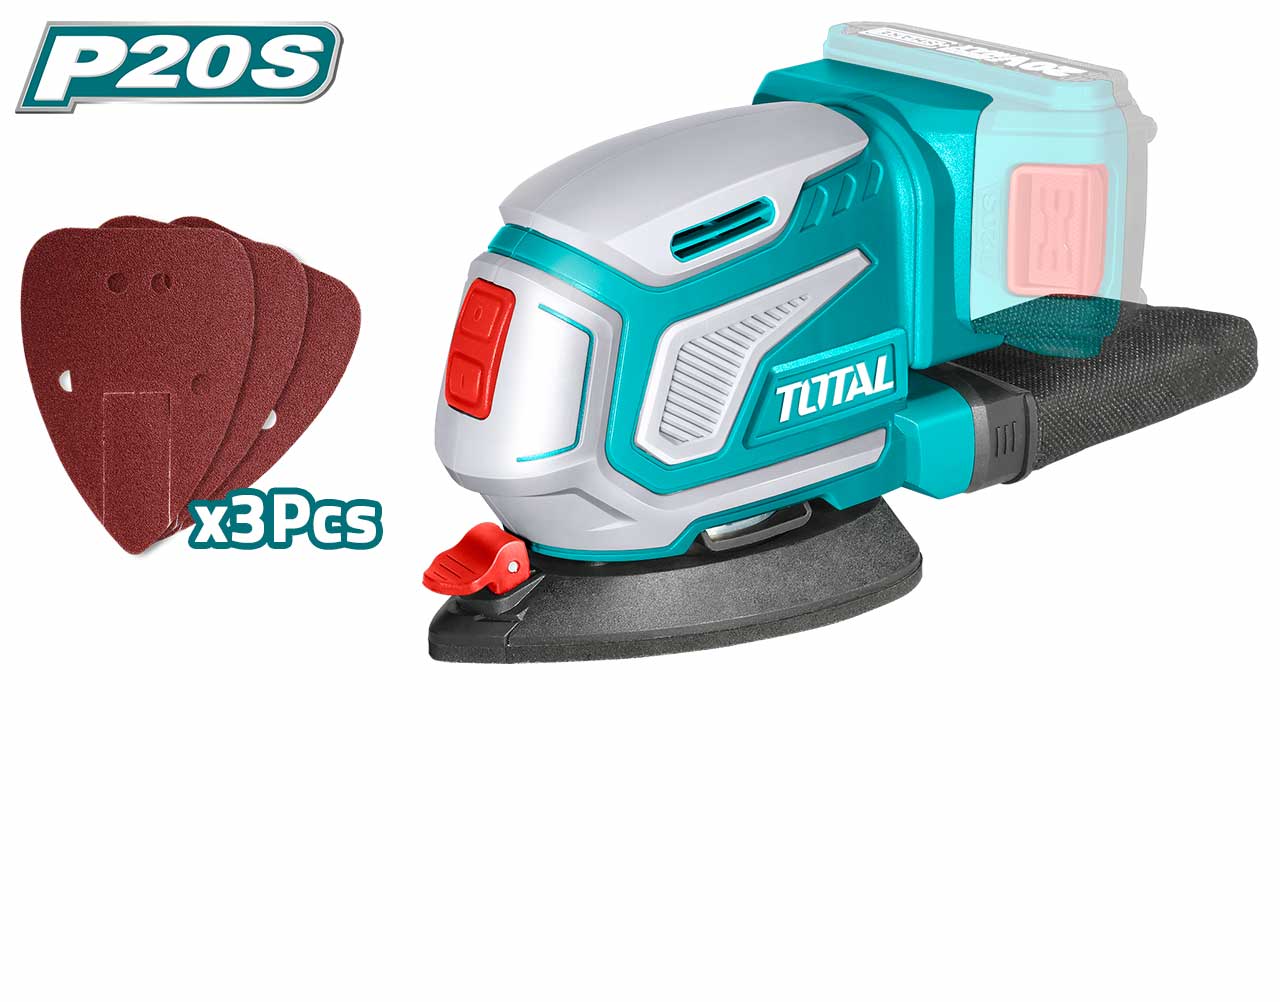 Total Lithium ion Palm Sander Price in Pakistan